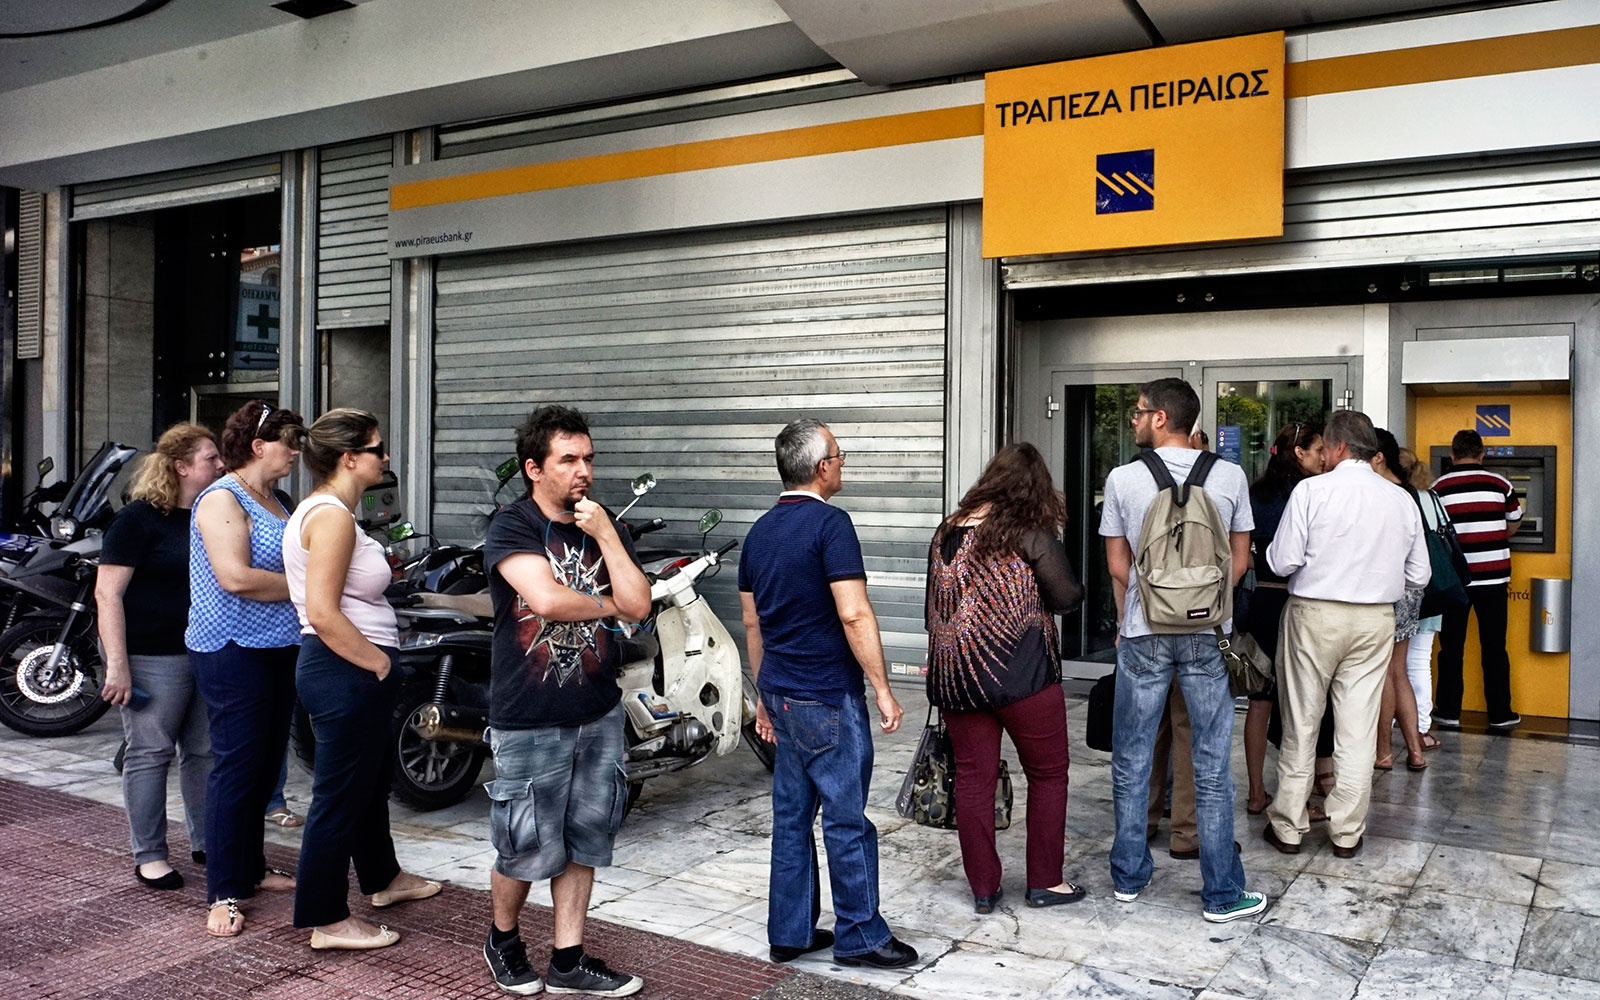 What Travelers Need to Know About the Economic Crisis in Greece